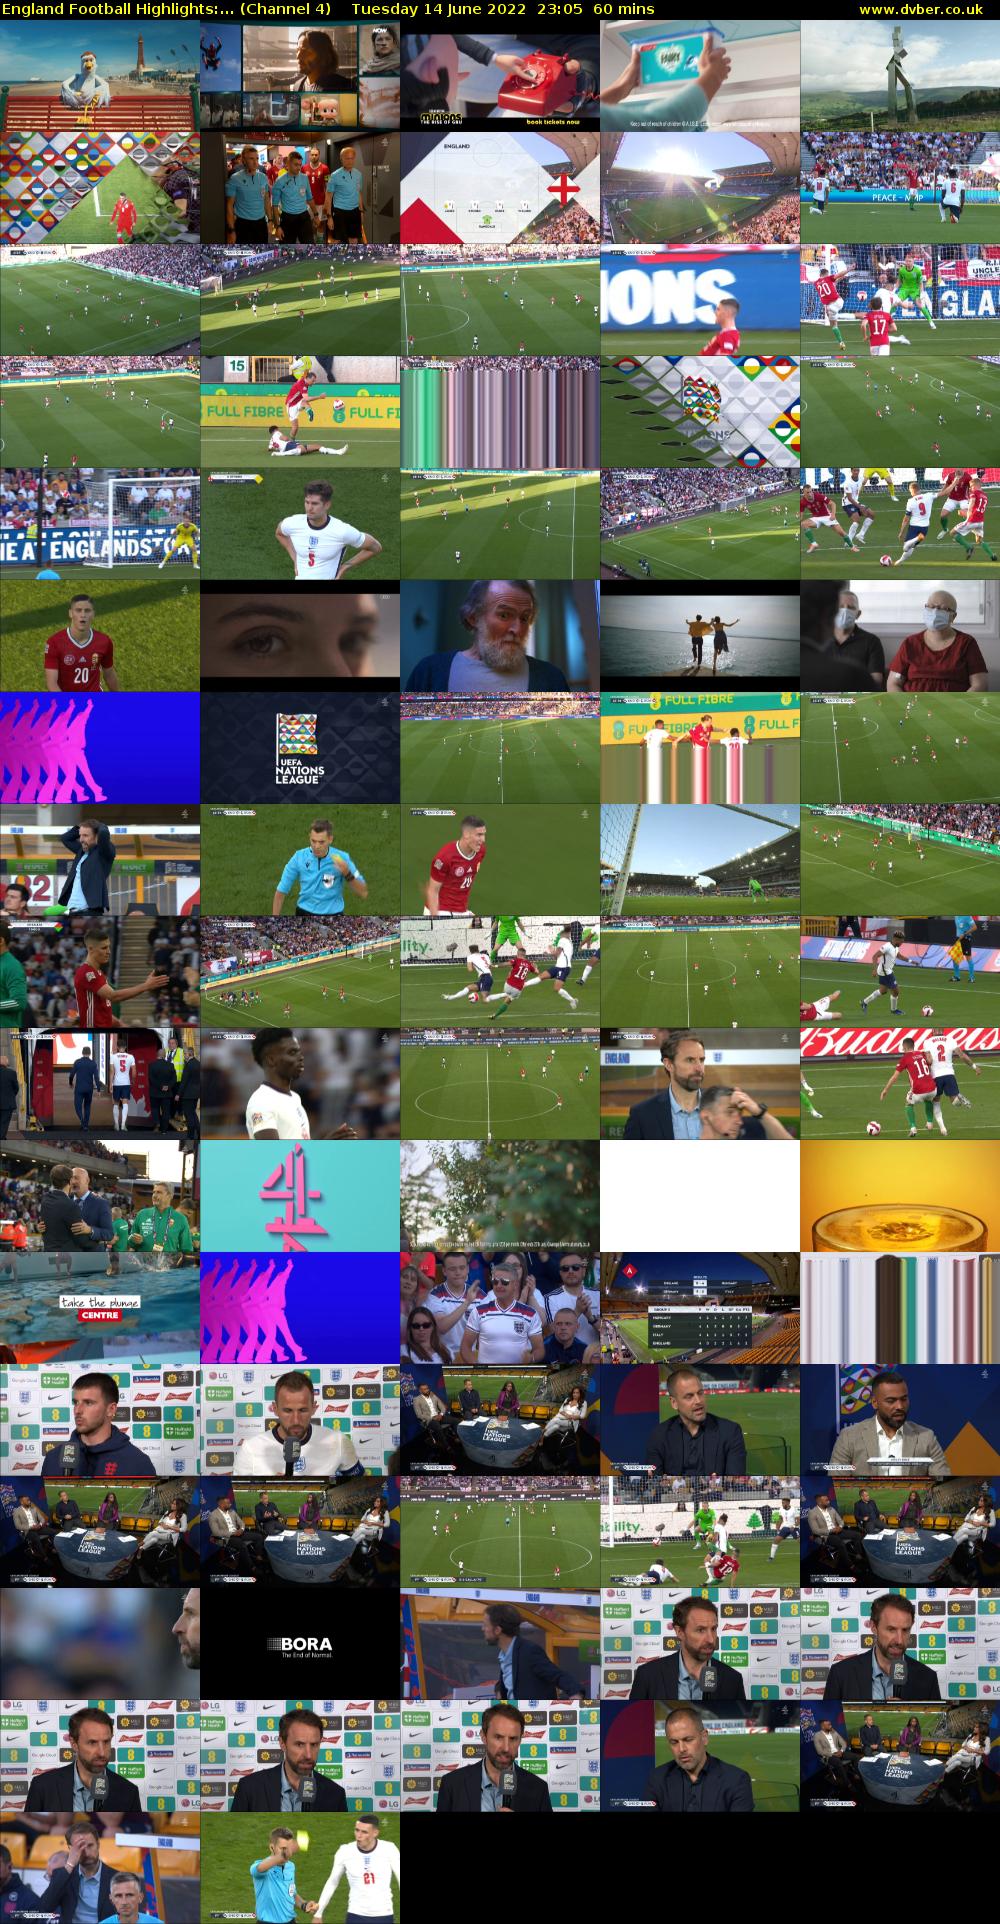 England Football Highlights:... (Channel 4) Tuesday 14 June 2022 23:05 - 00:05